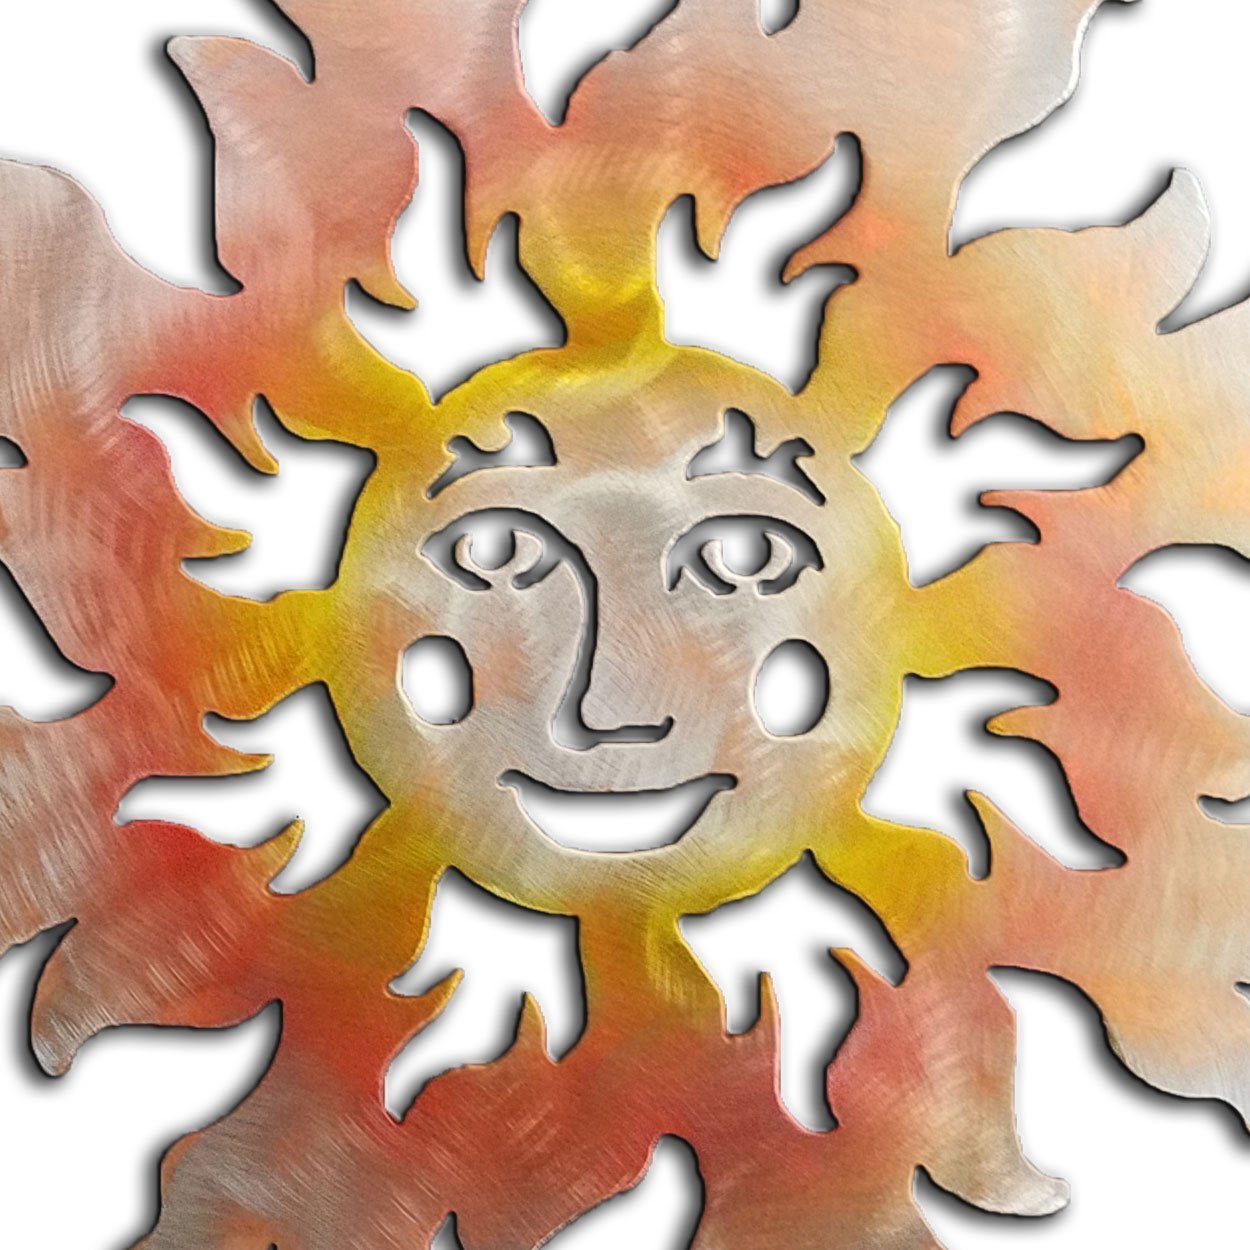 165071 - 12-inch small Smiling Sun Face 3D Metal Wall Art in a vibrant sunset swirl finish